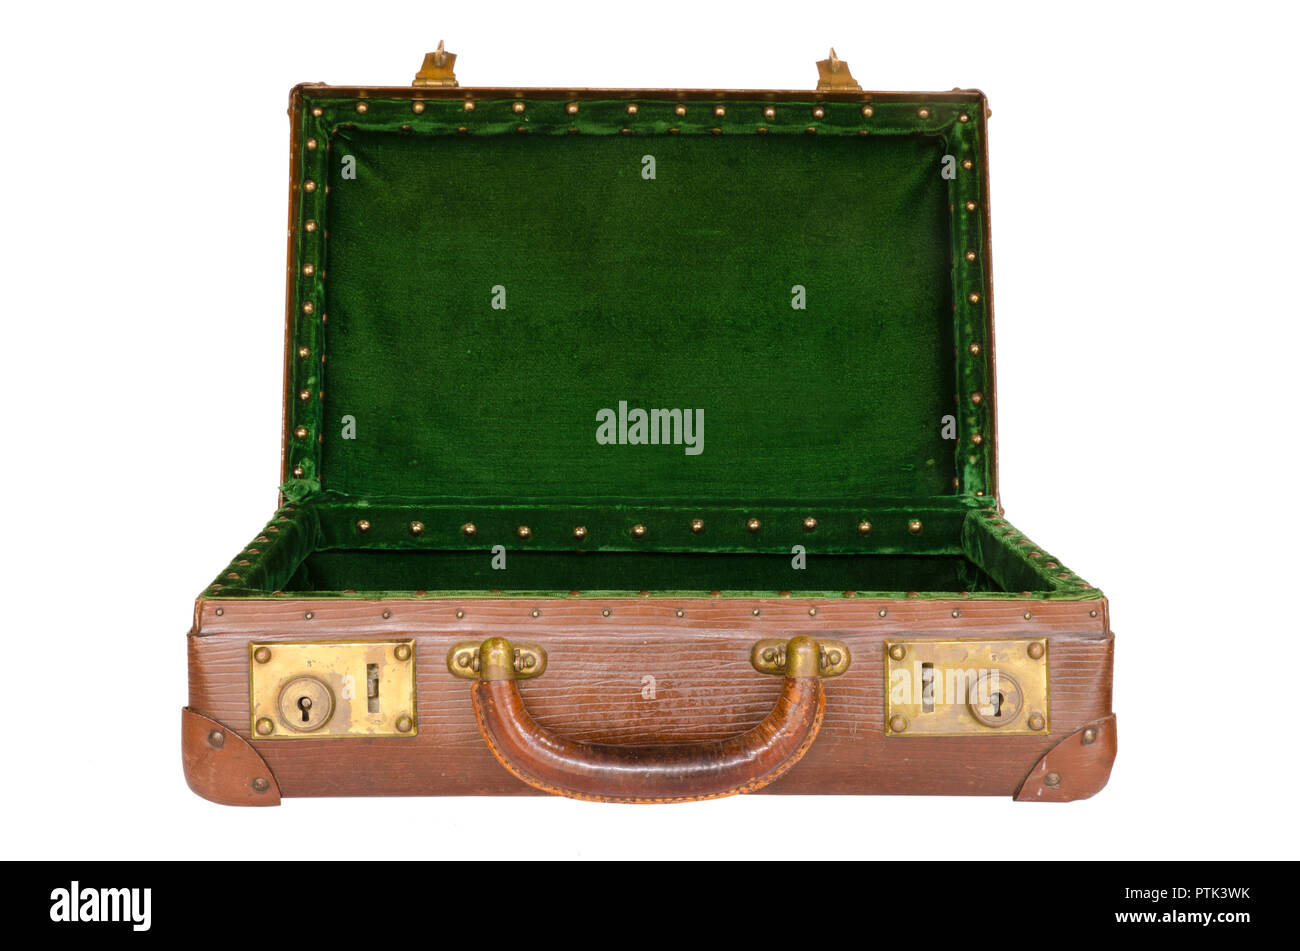 old worn open suitcase with green interior Stock Photo